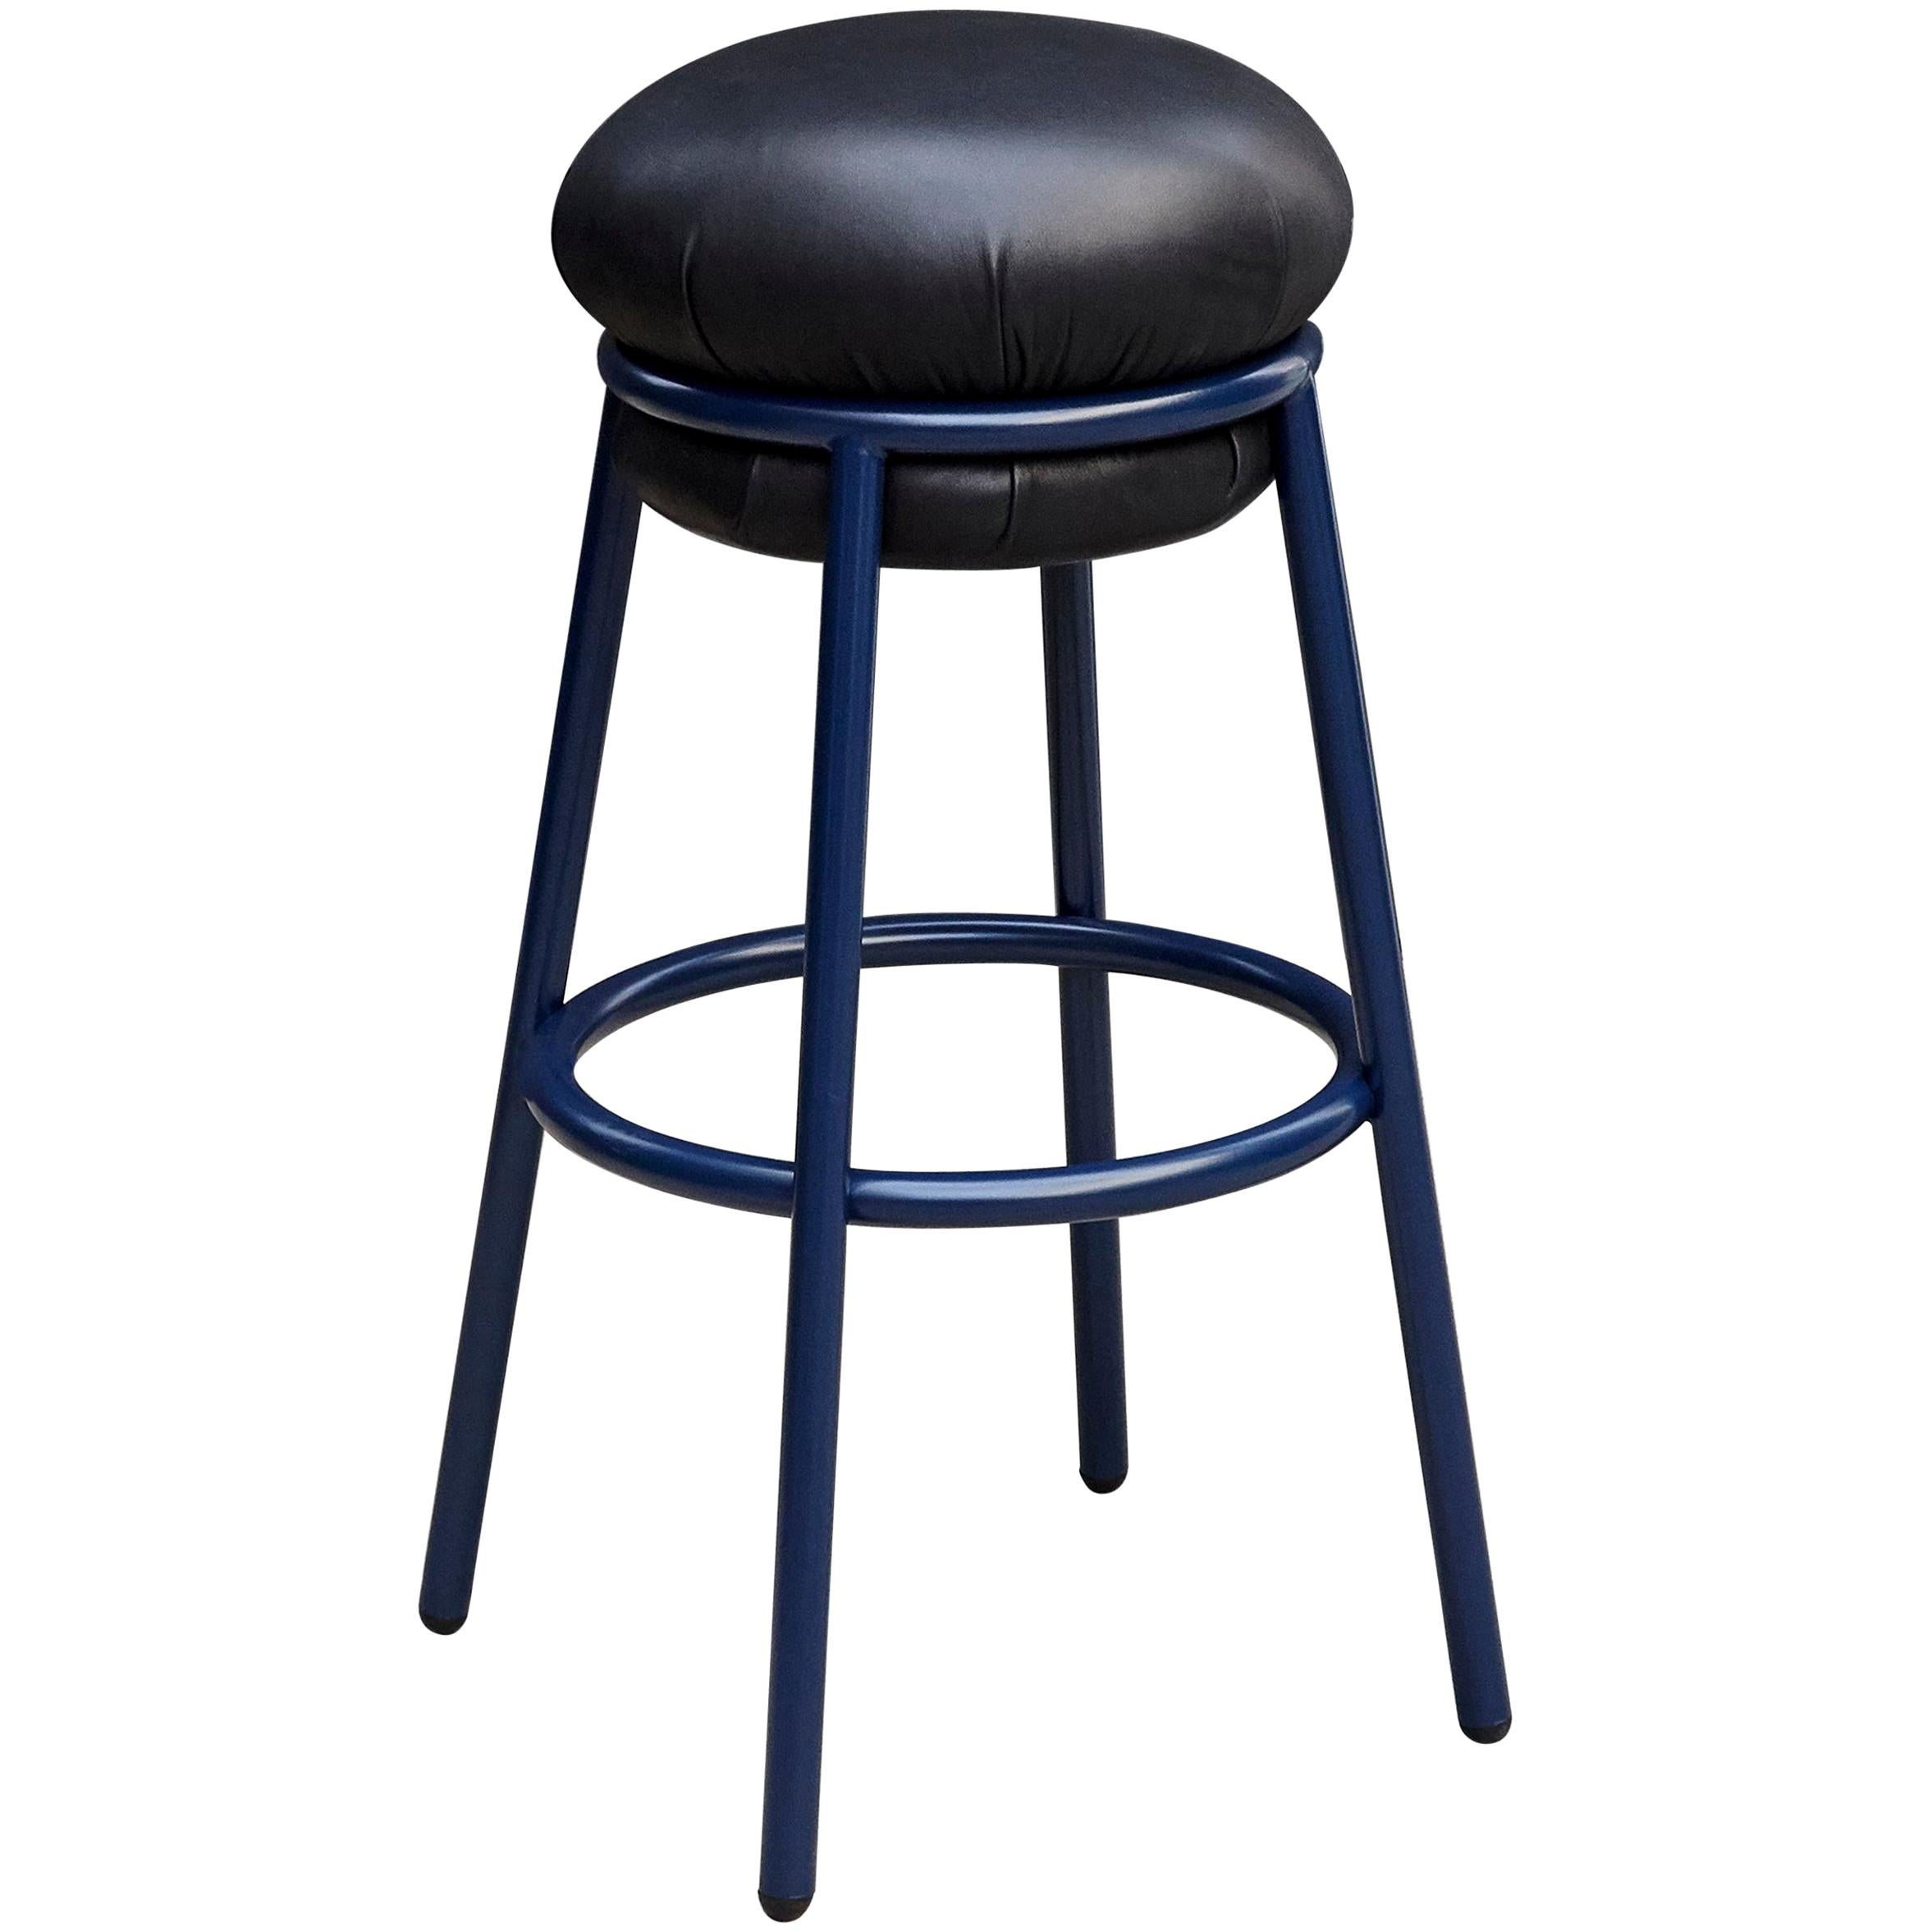 Stephen Burks Grasso, Black Leather, Blue Lacquered Metal Stool  For Sale